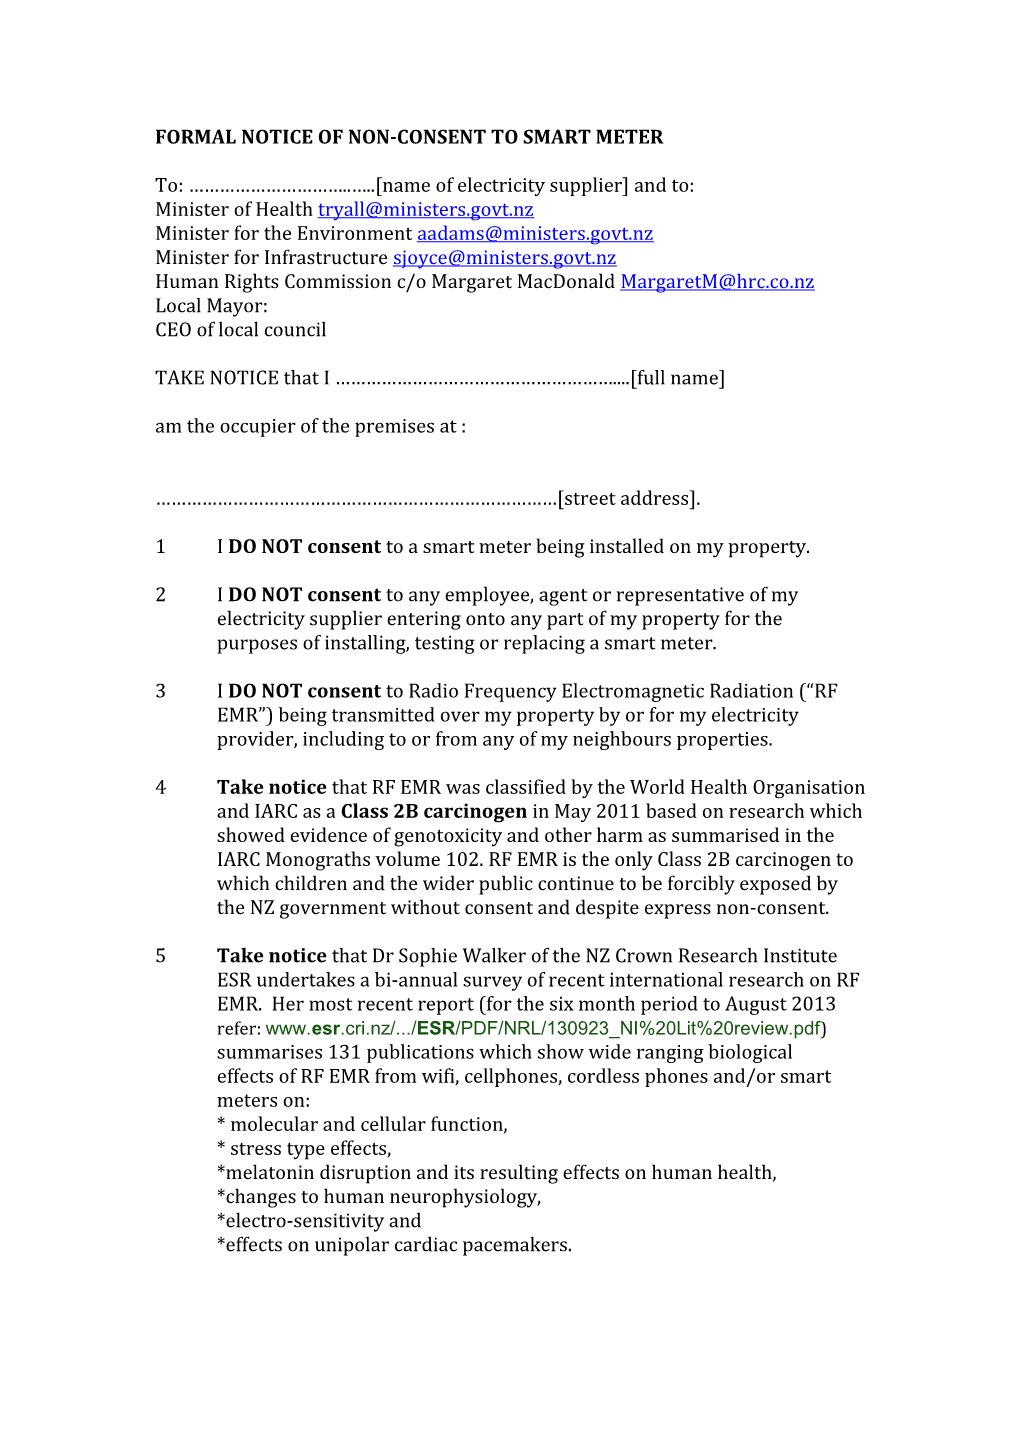 Formal Notice of Non-Consent to Smart Meter